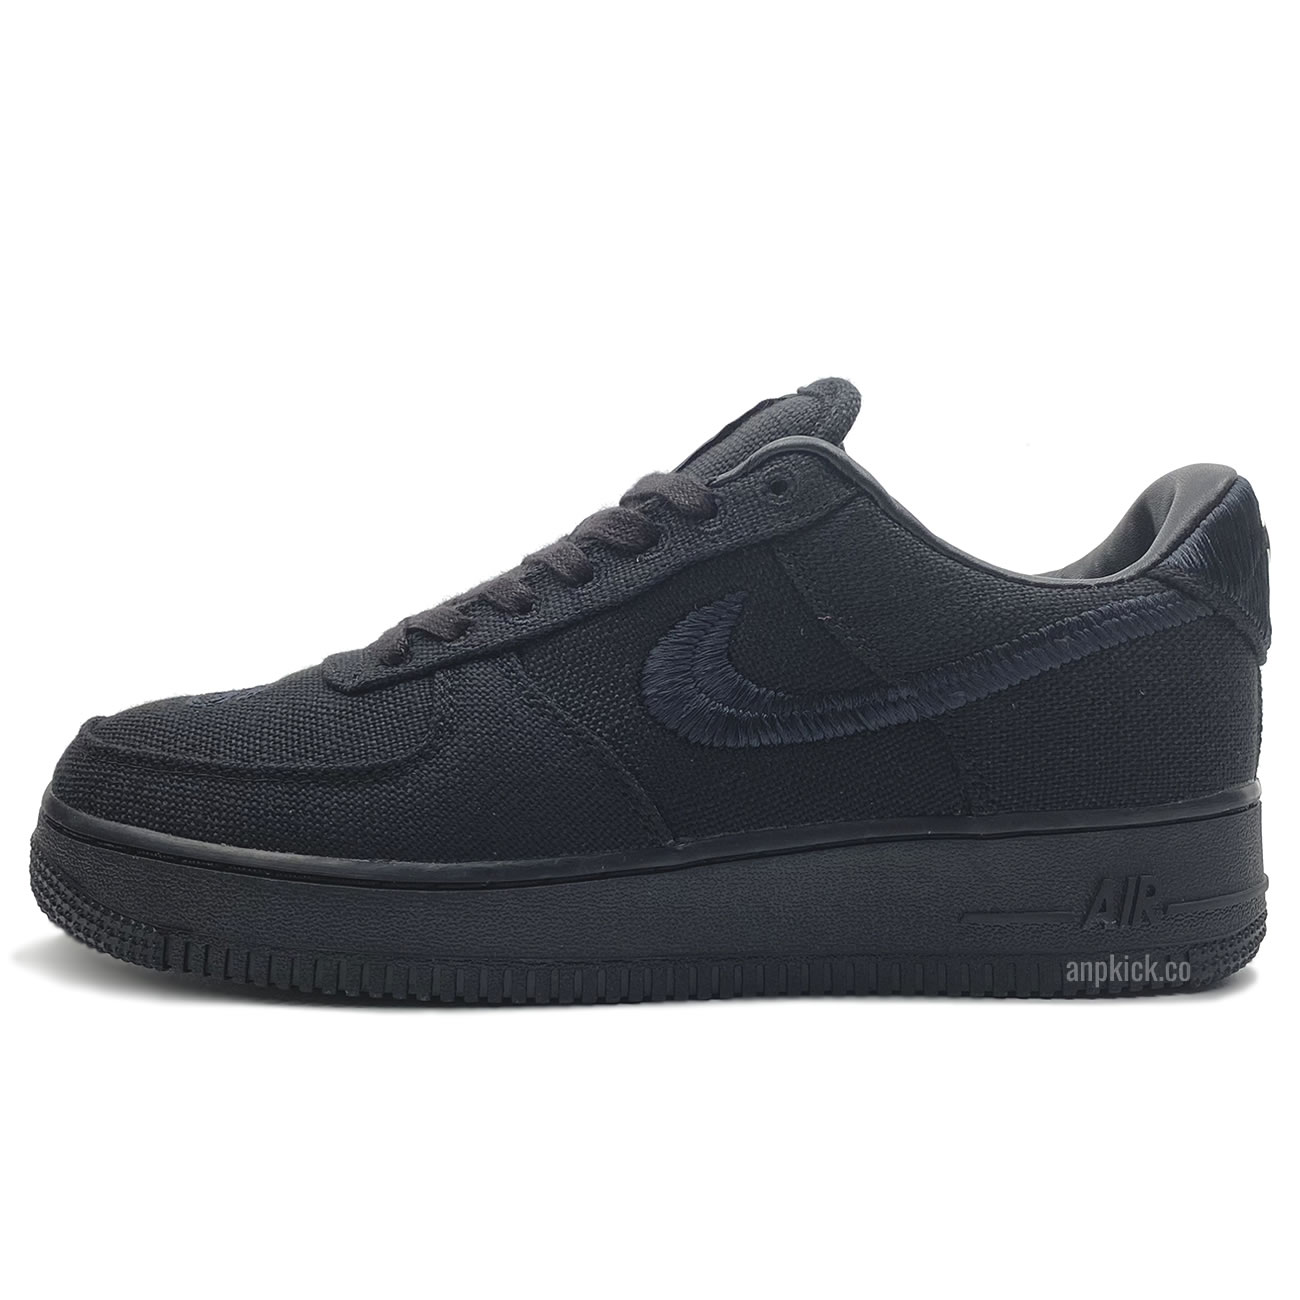 Stussy Nike Air Force 1 Low Black Cz9084 001 Release Date (1) - newkick.org